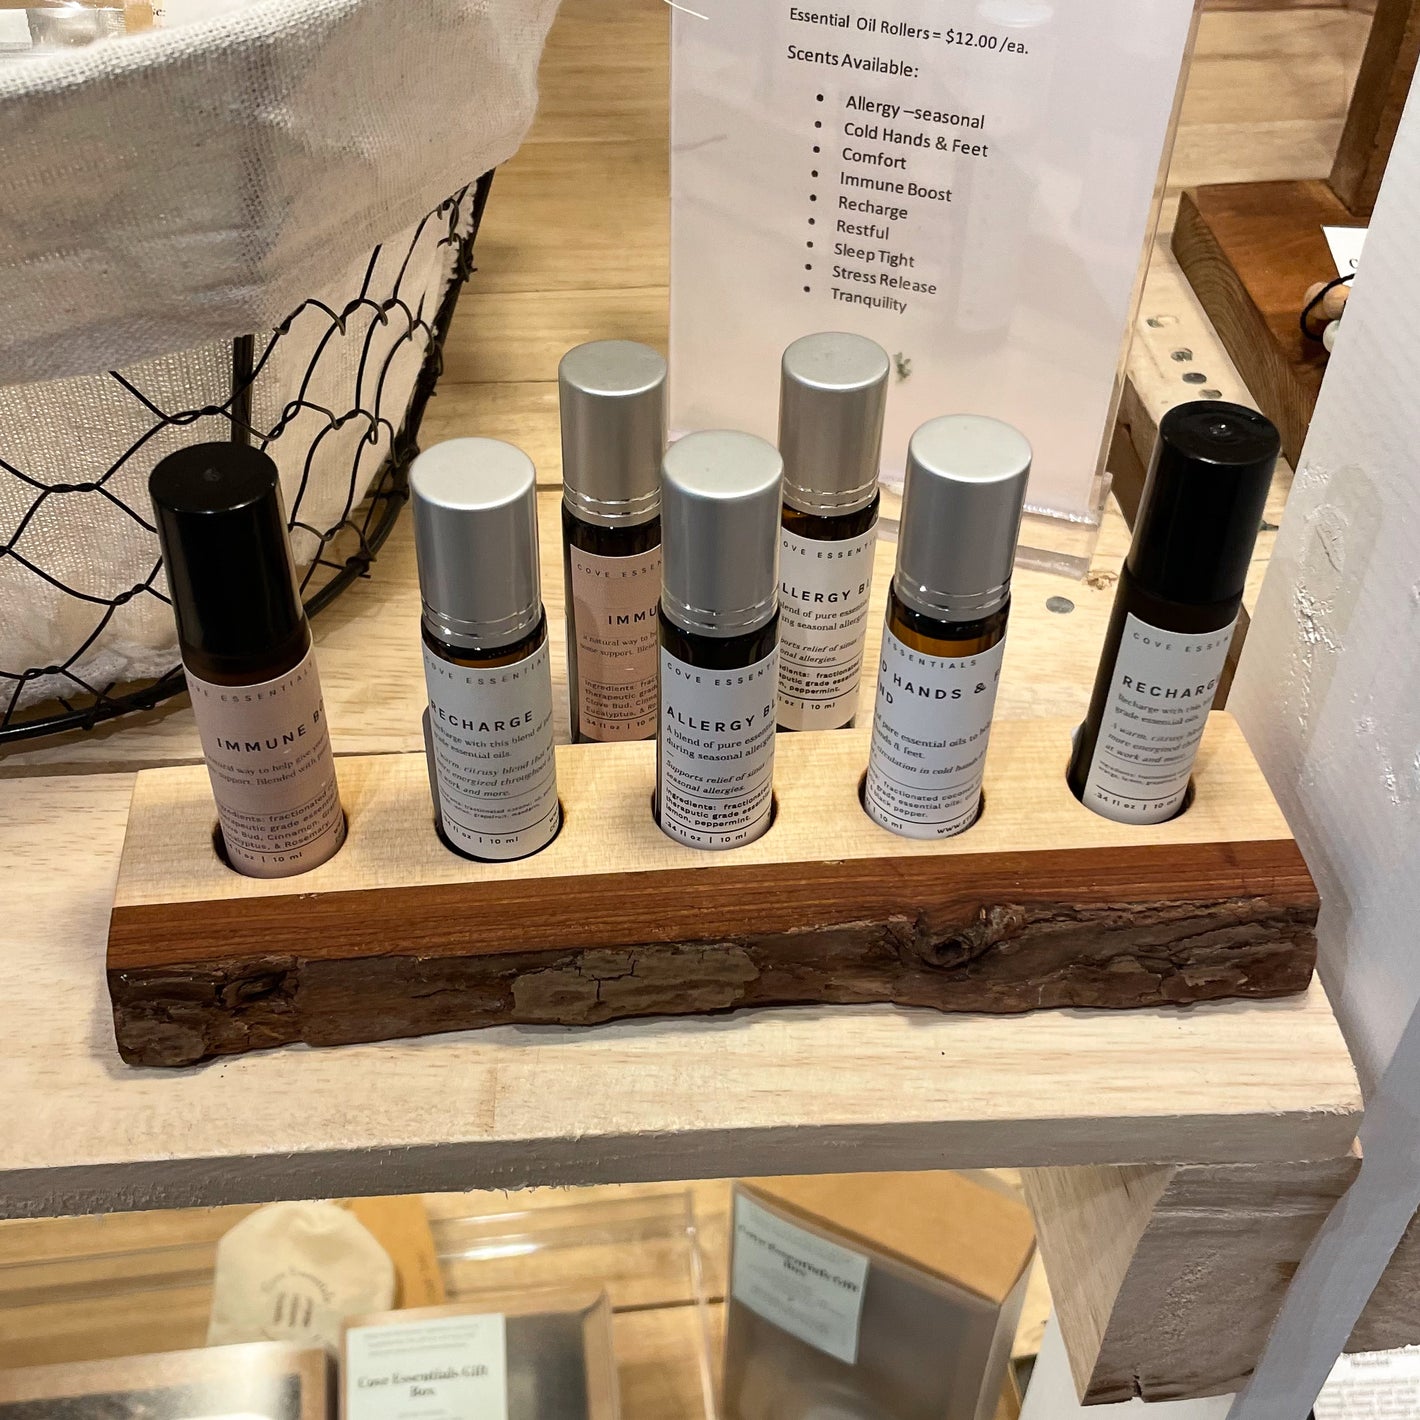 Custom live edge essential oil display for retail store by Tundra Designs.